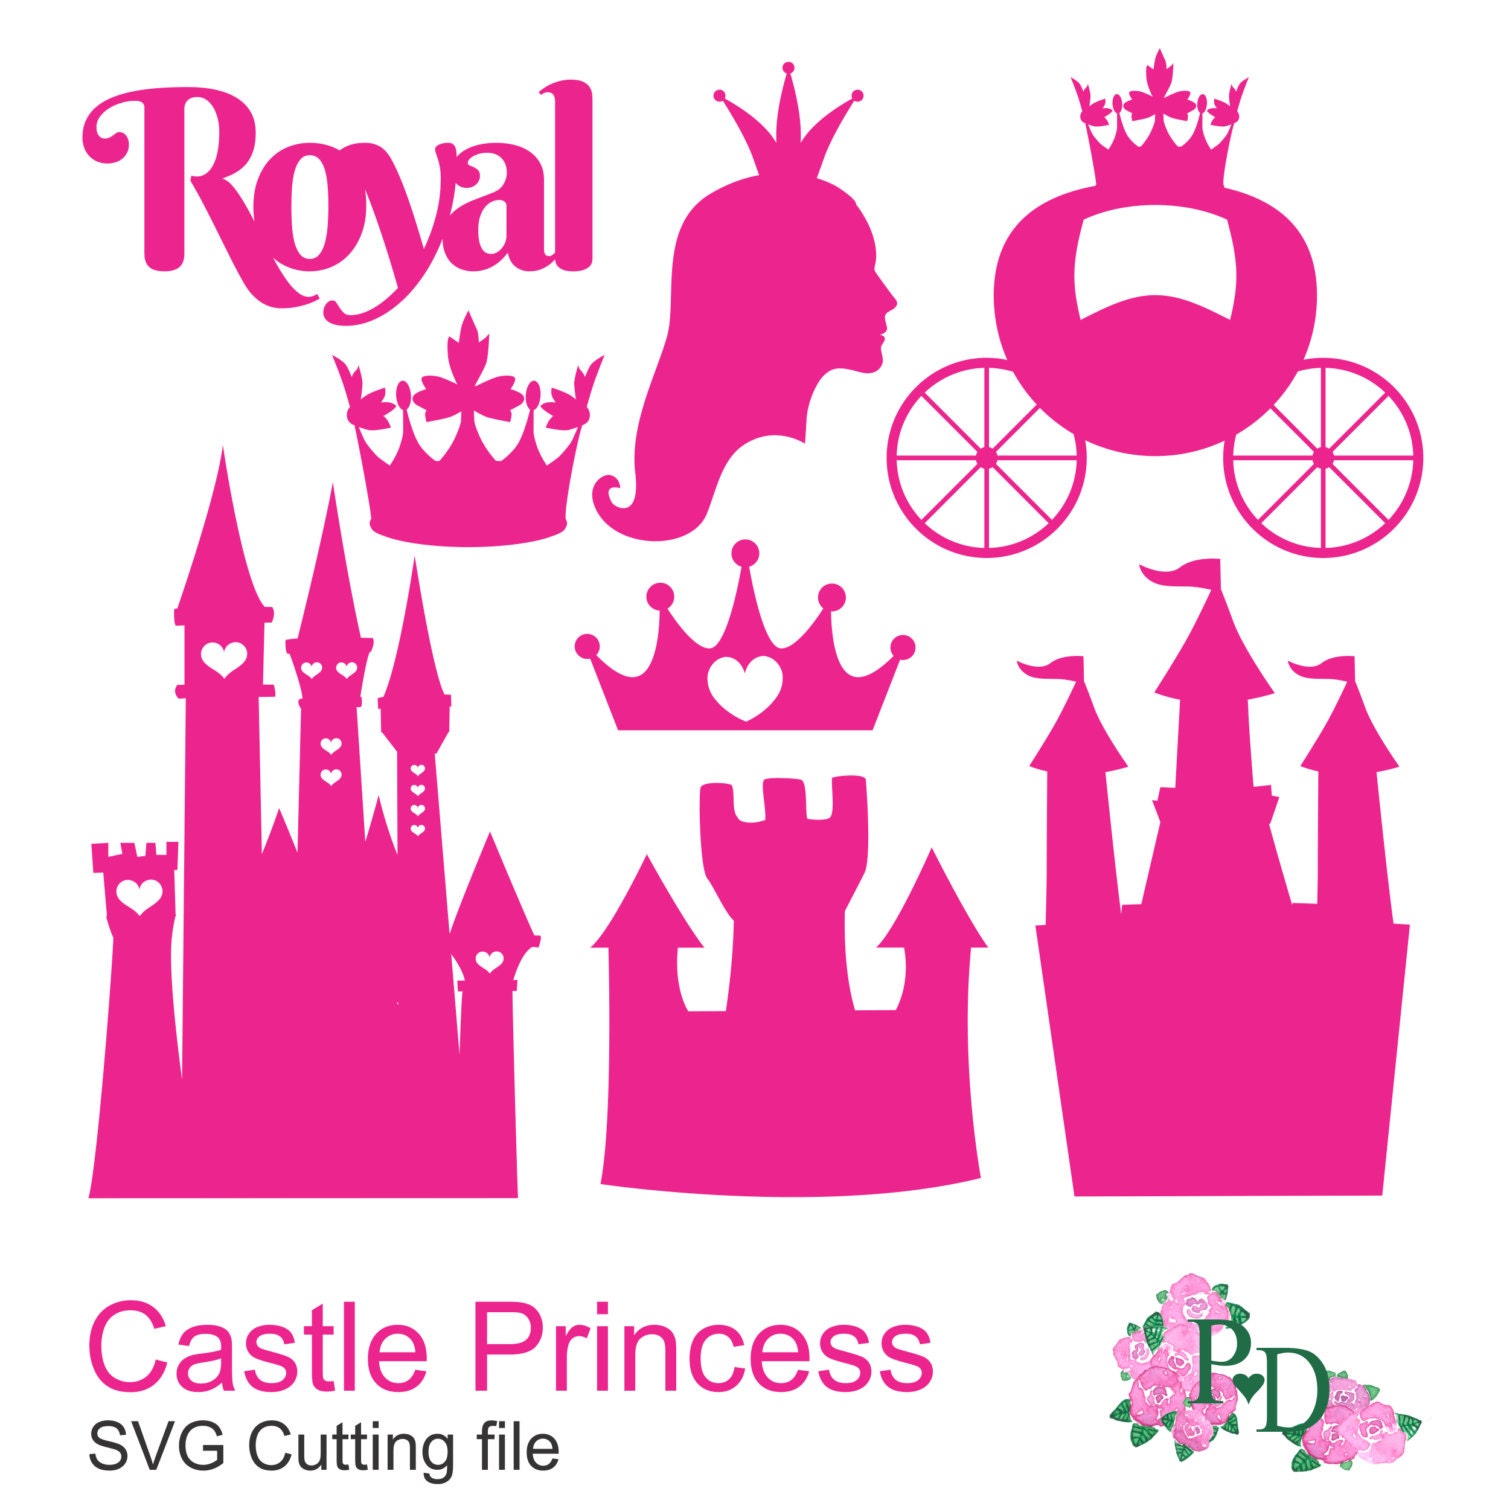 Royal DXF SVG PNG Castle Princess Cinderella Cutting files for